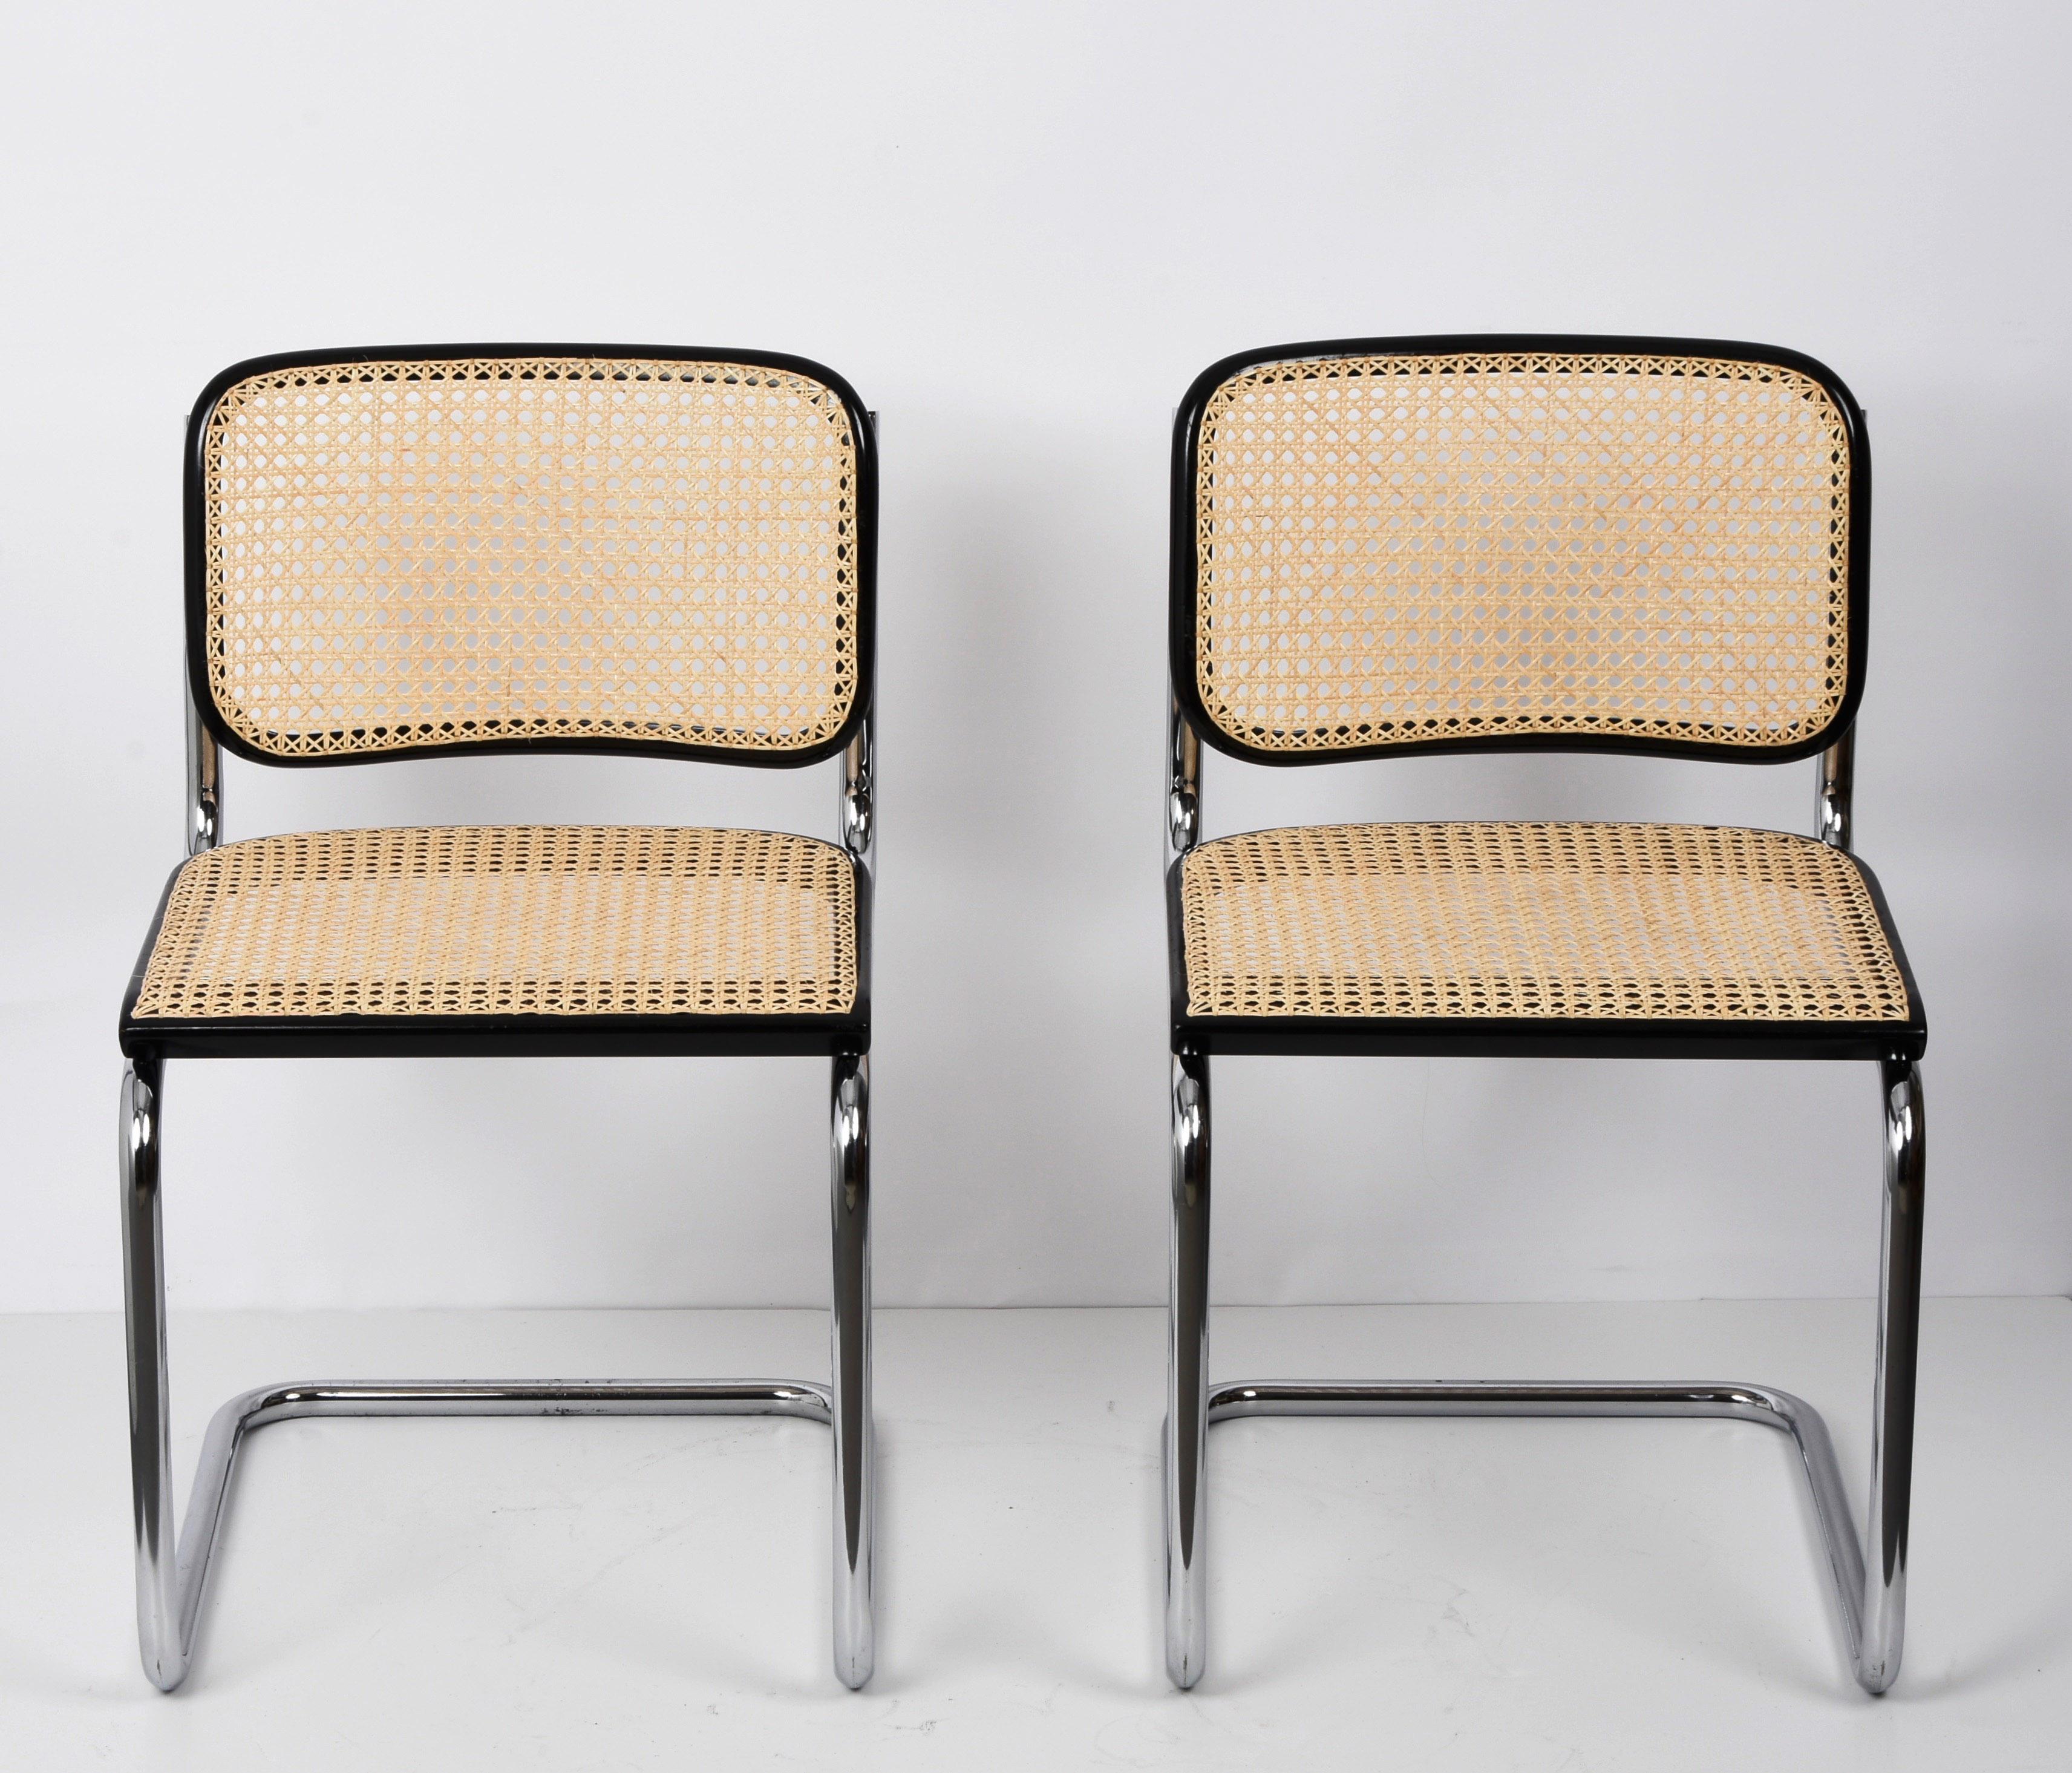 Pair of Midcentury Marcel Breuer Chrome and Rattan Cesca Chairs for Gavina 1970s For Sale 9